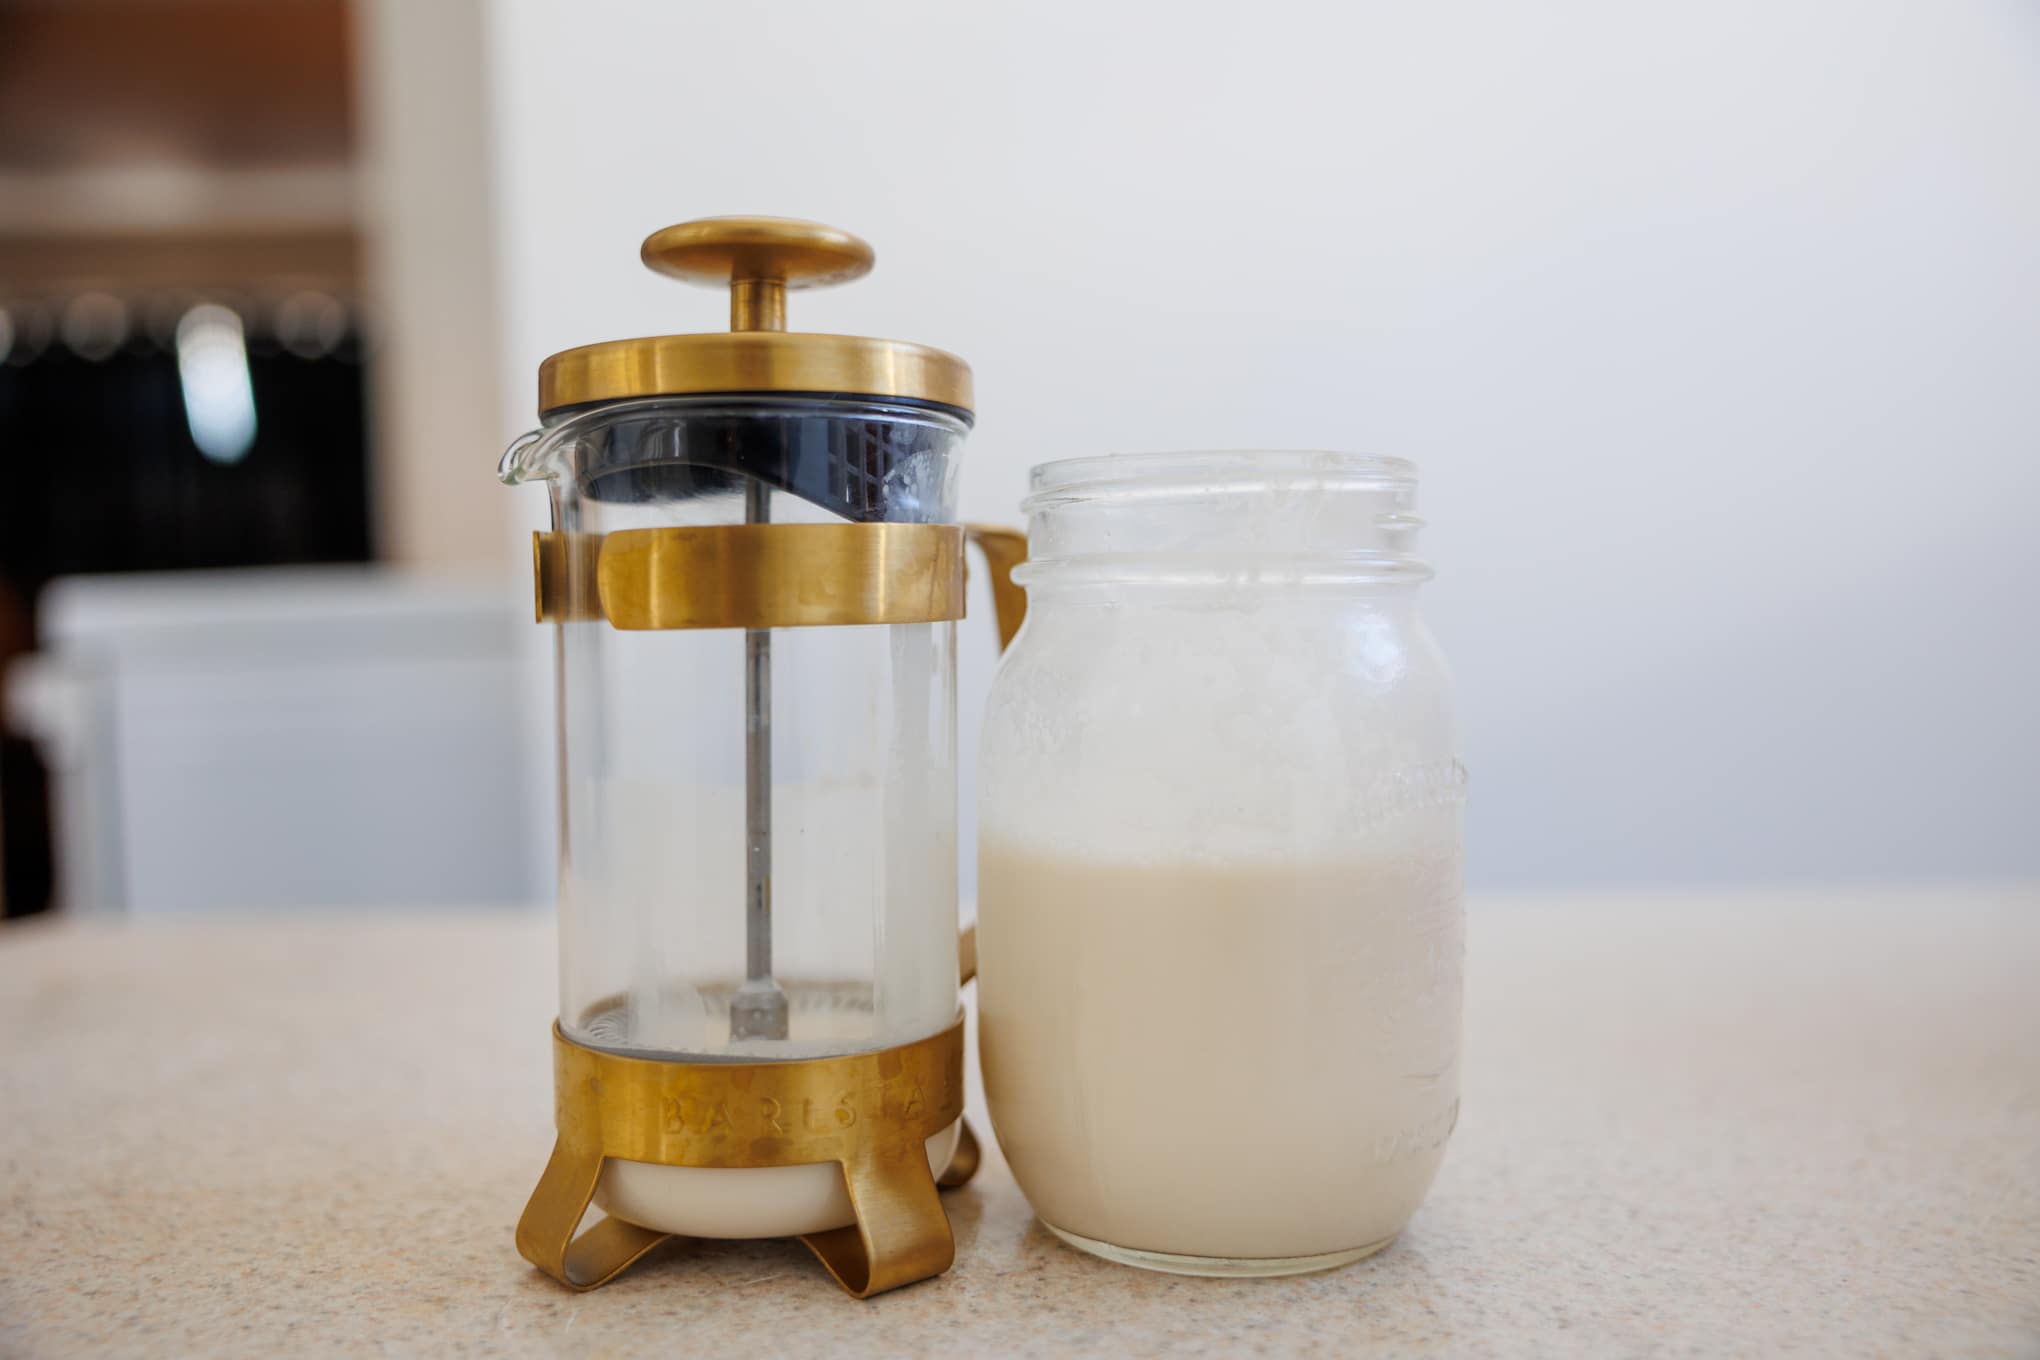 A French press and mason jar filled with sweet cream